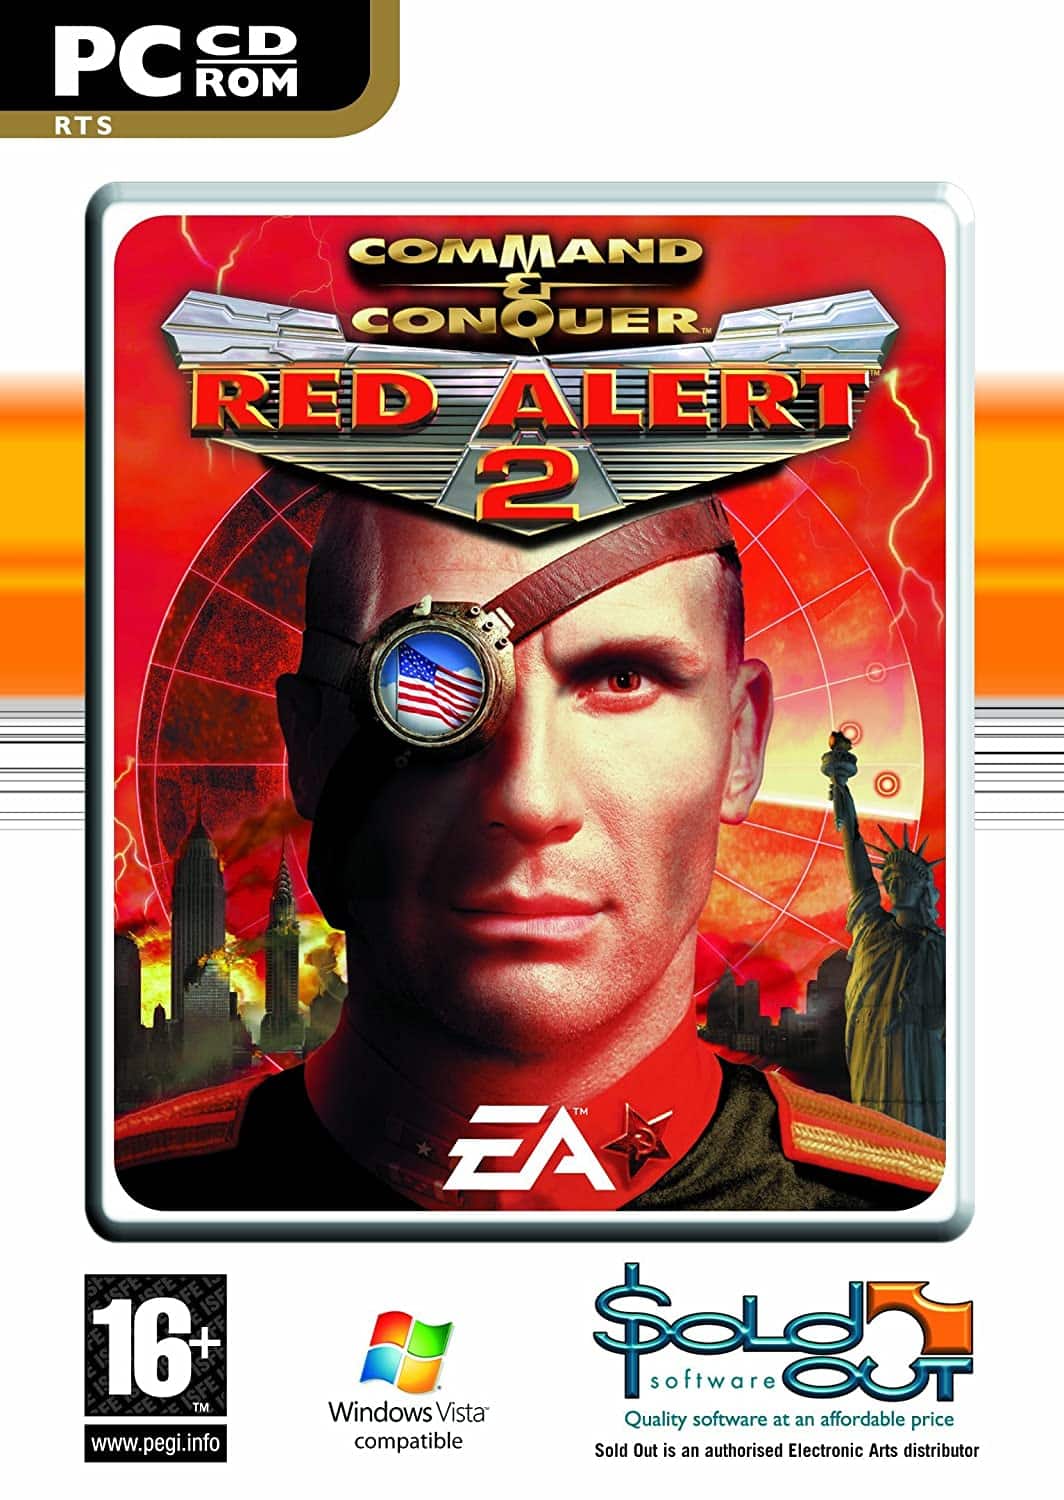 Command & Conquer: Red Alert 2 player count stats